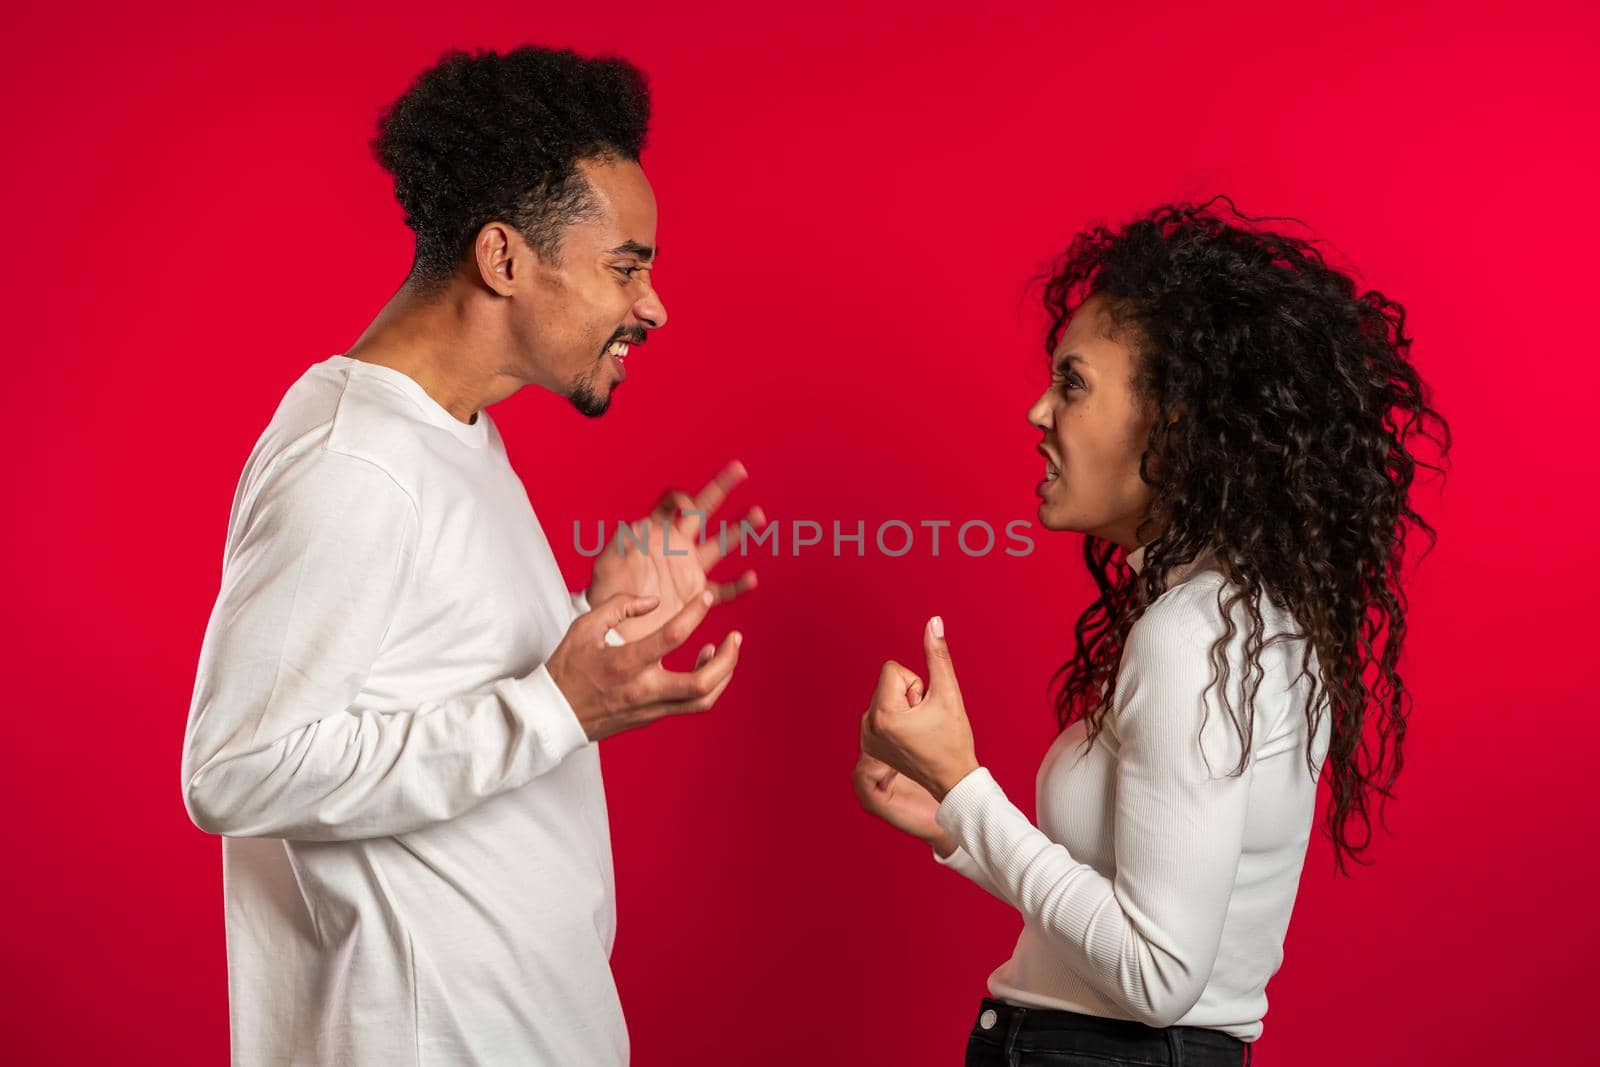 Young african american match emotionally quarreling on red background in studio. Concept of conflict, problems in relationships.